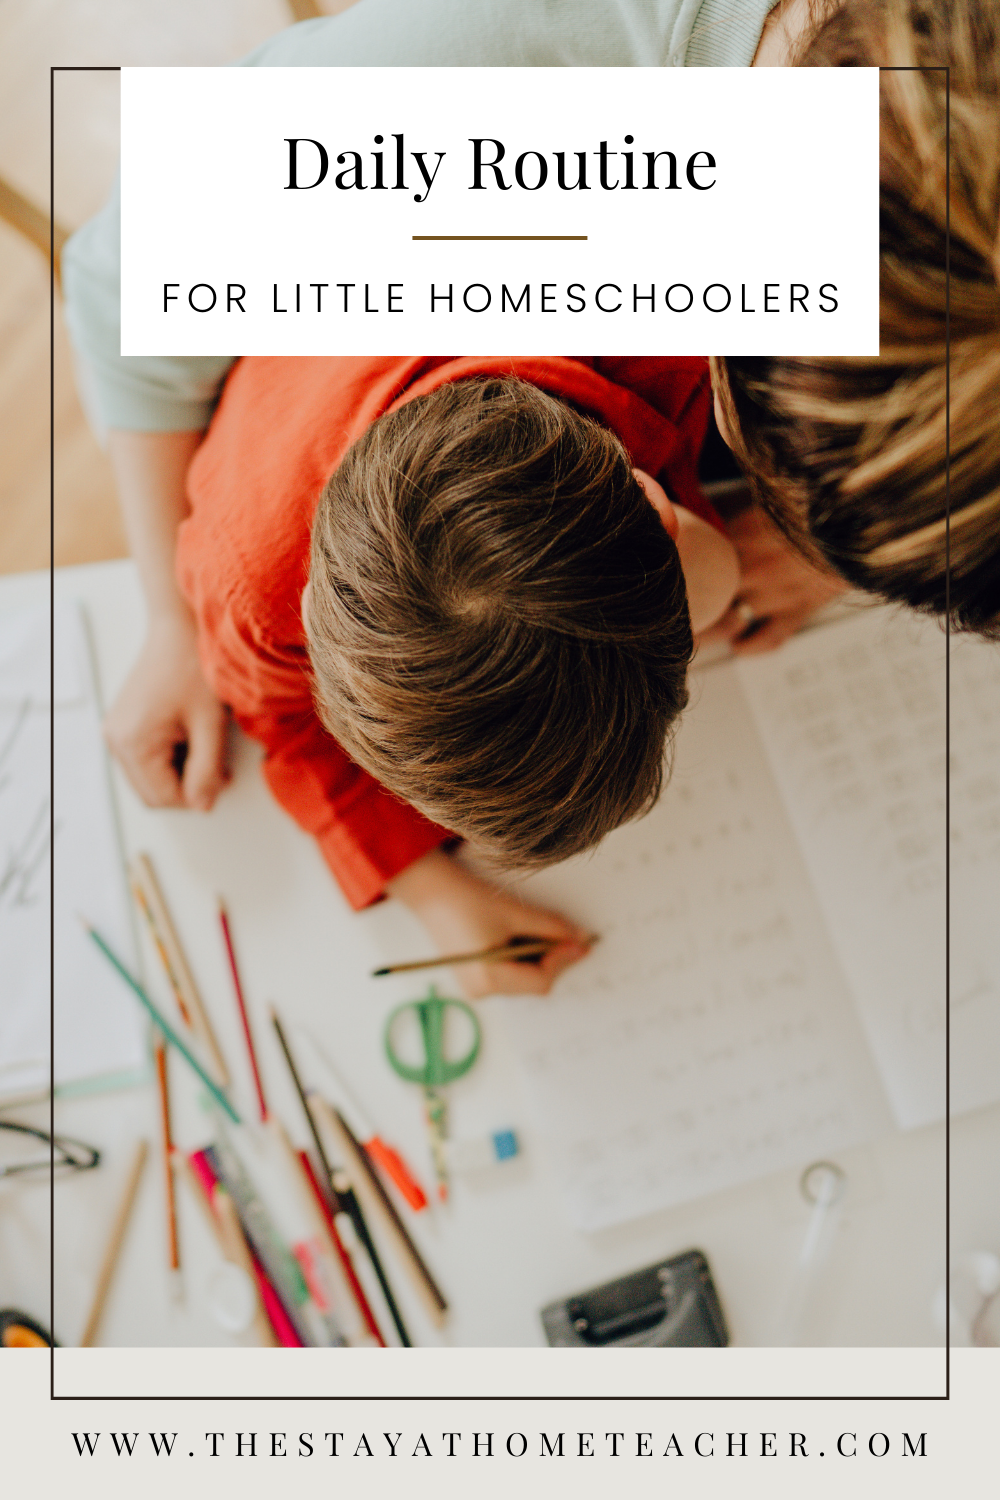 Trying to fit everything in each day? Come take a look at our daily routine as a homeschool family and see how we organize our time at home!